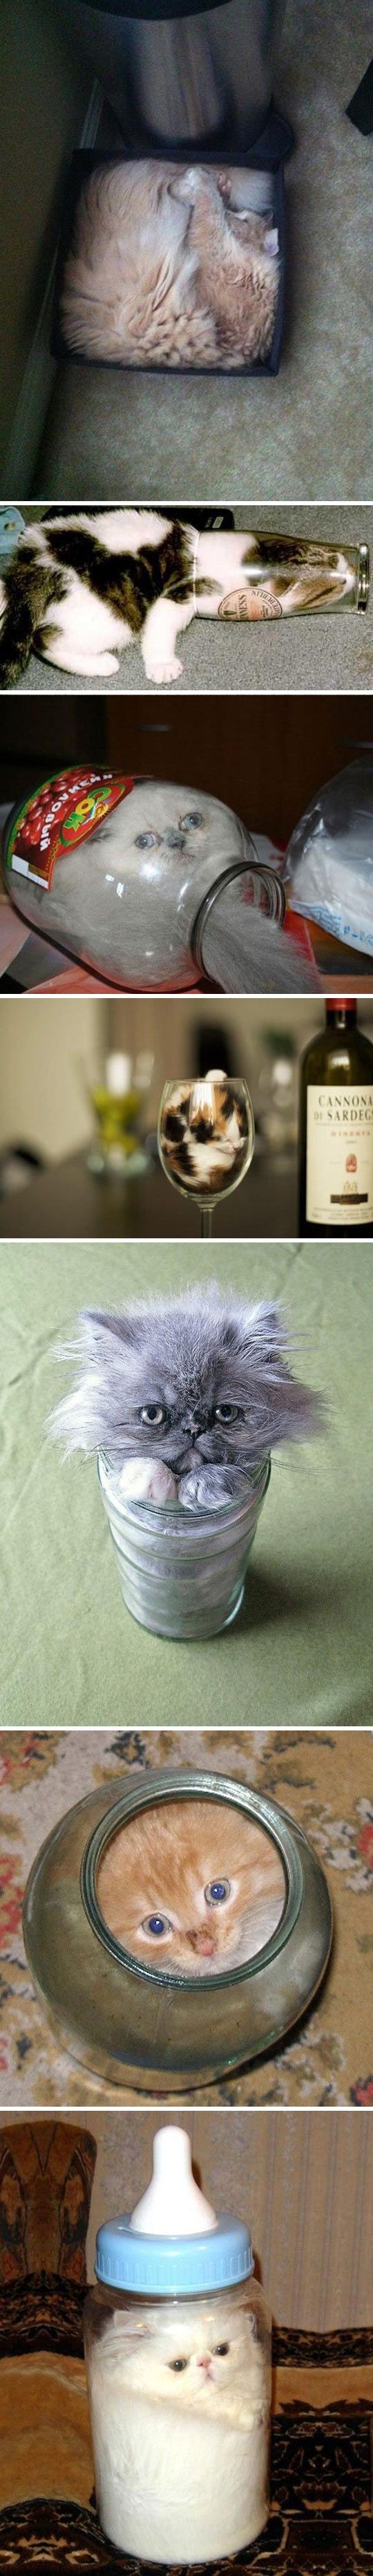 Why cats are liquids // funny pictures - funny pho...